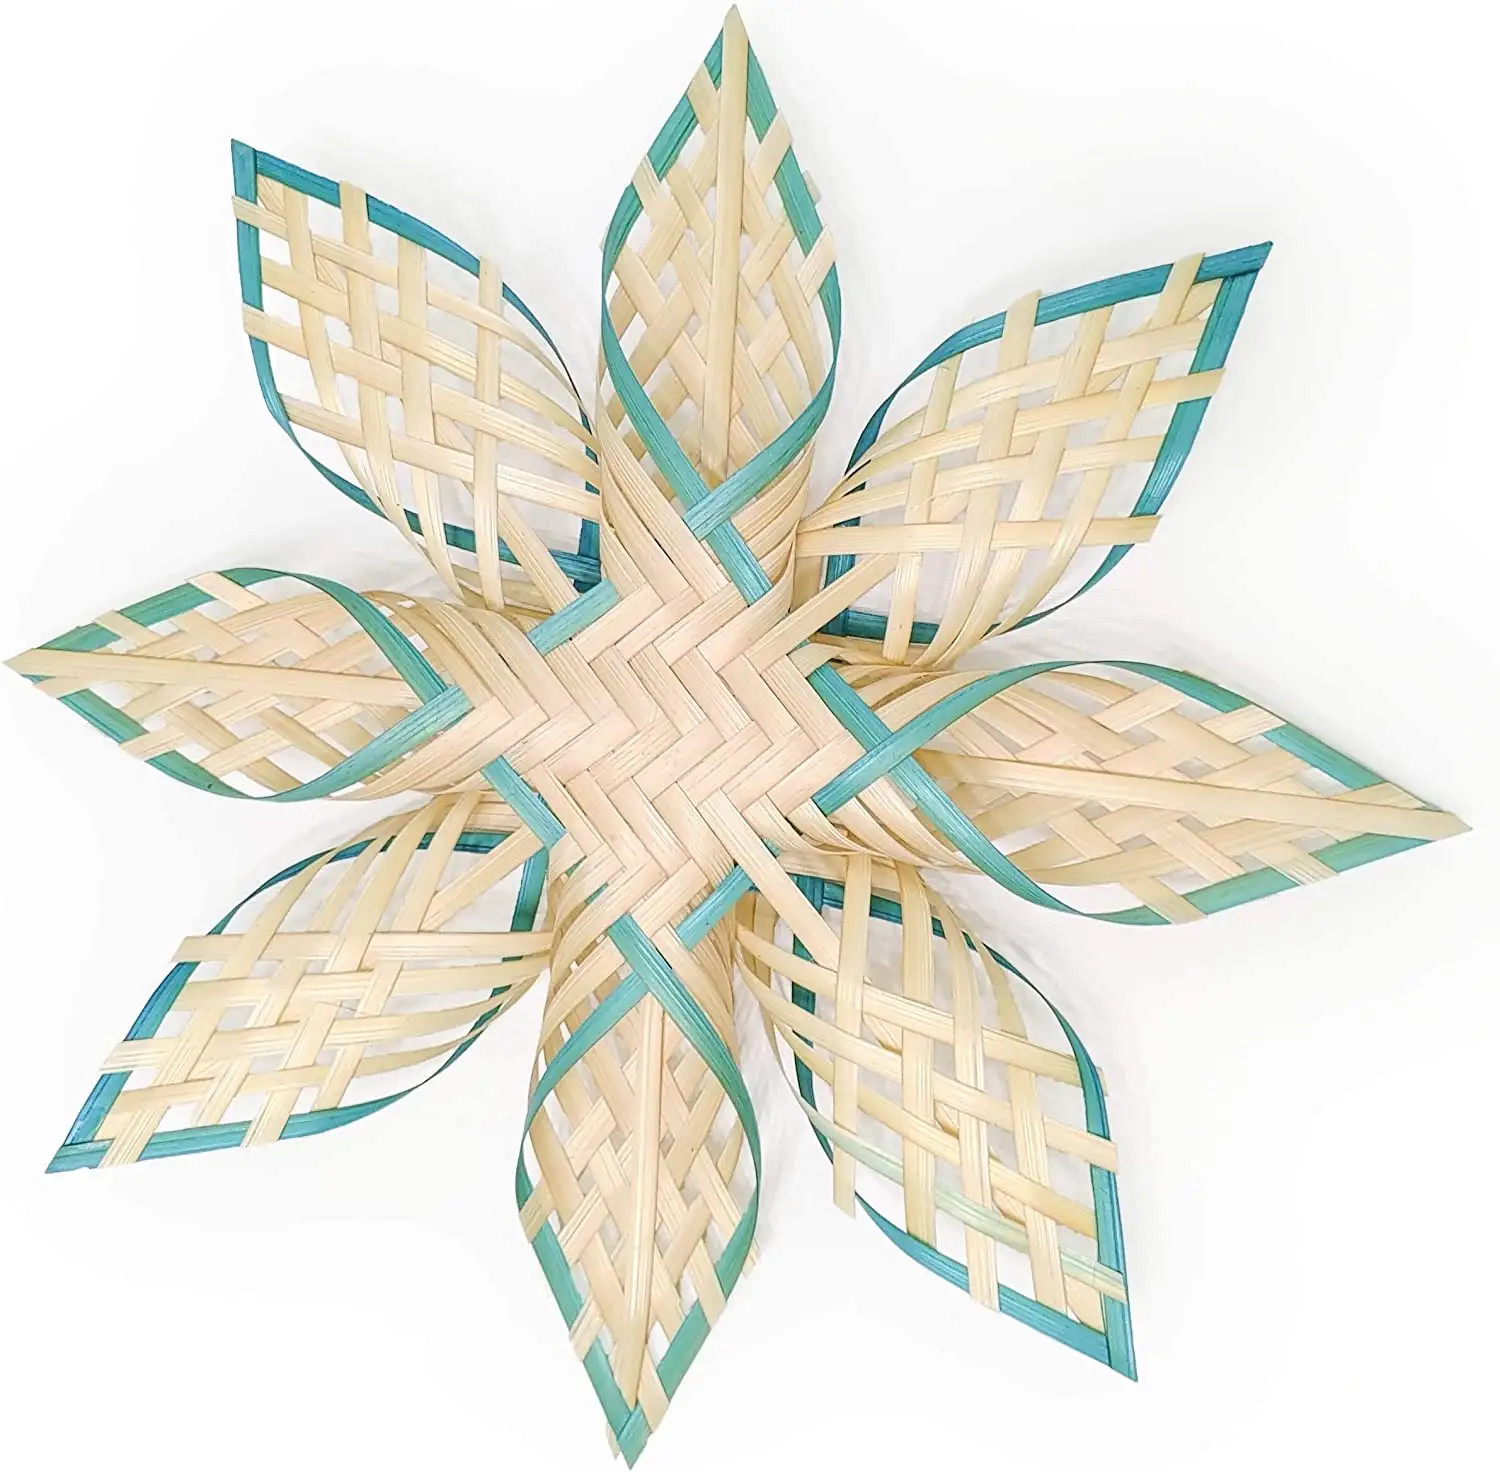 New arrival top trending natural woven bamboo snowflake Christmas decor tree from Vietnam